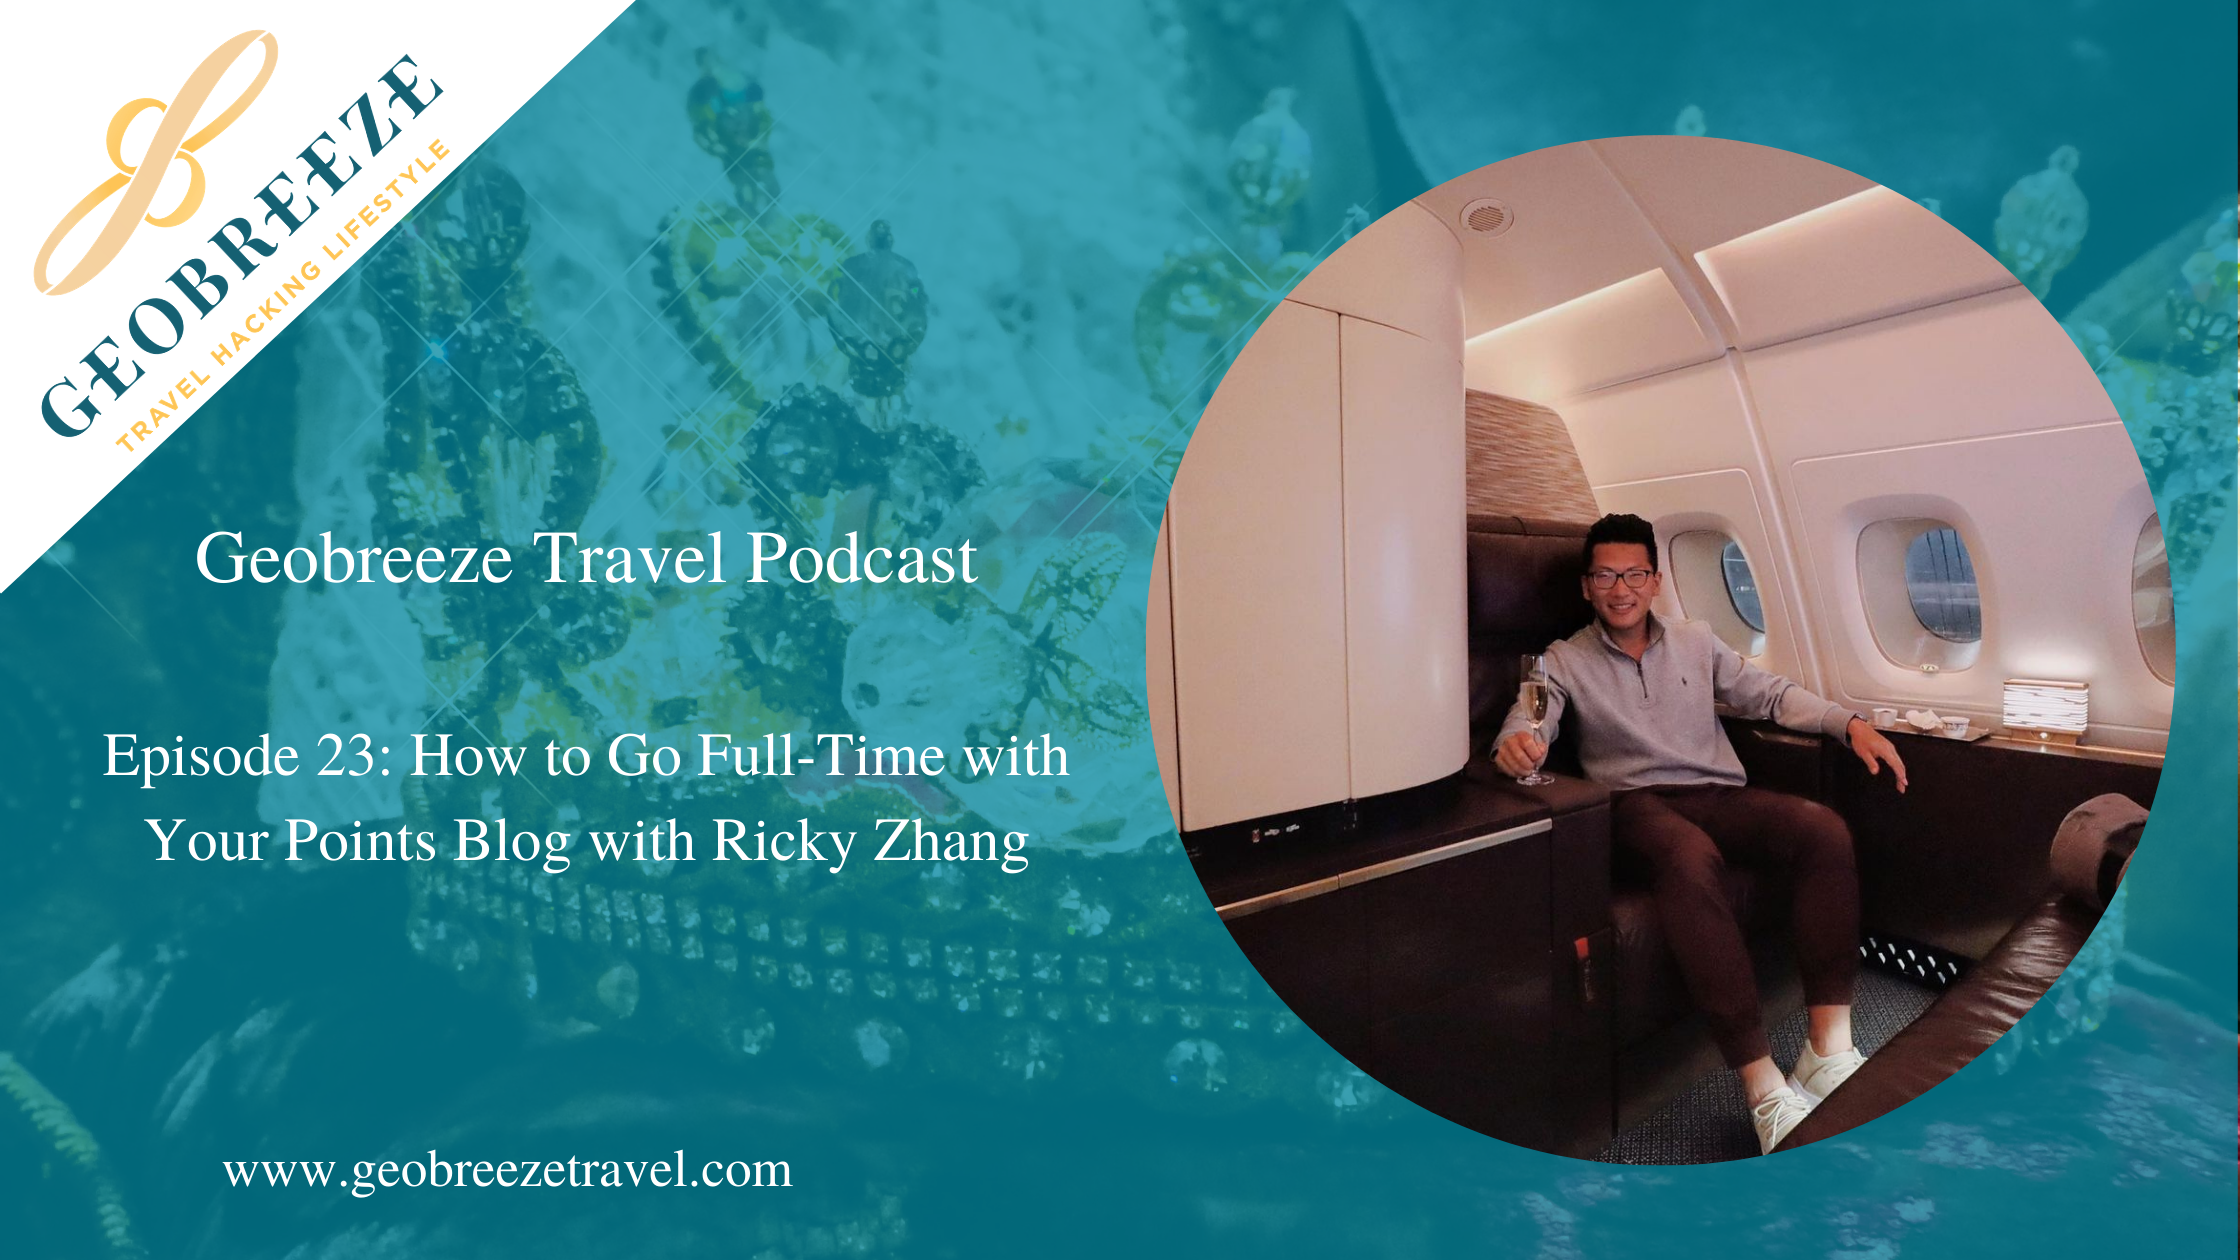 Episode 23: How to Go Full-Time with Your Points Blog with Ricky Zhang